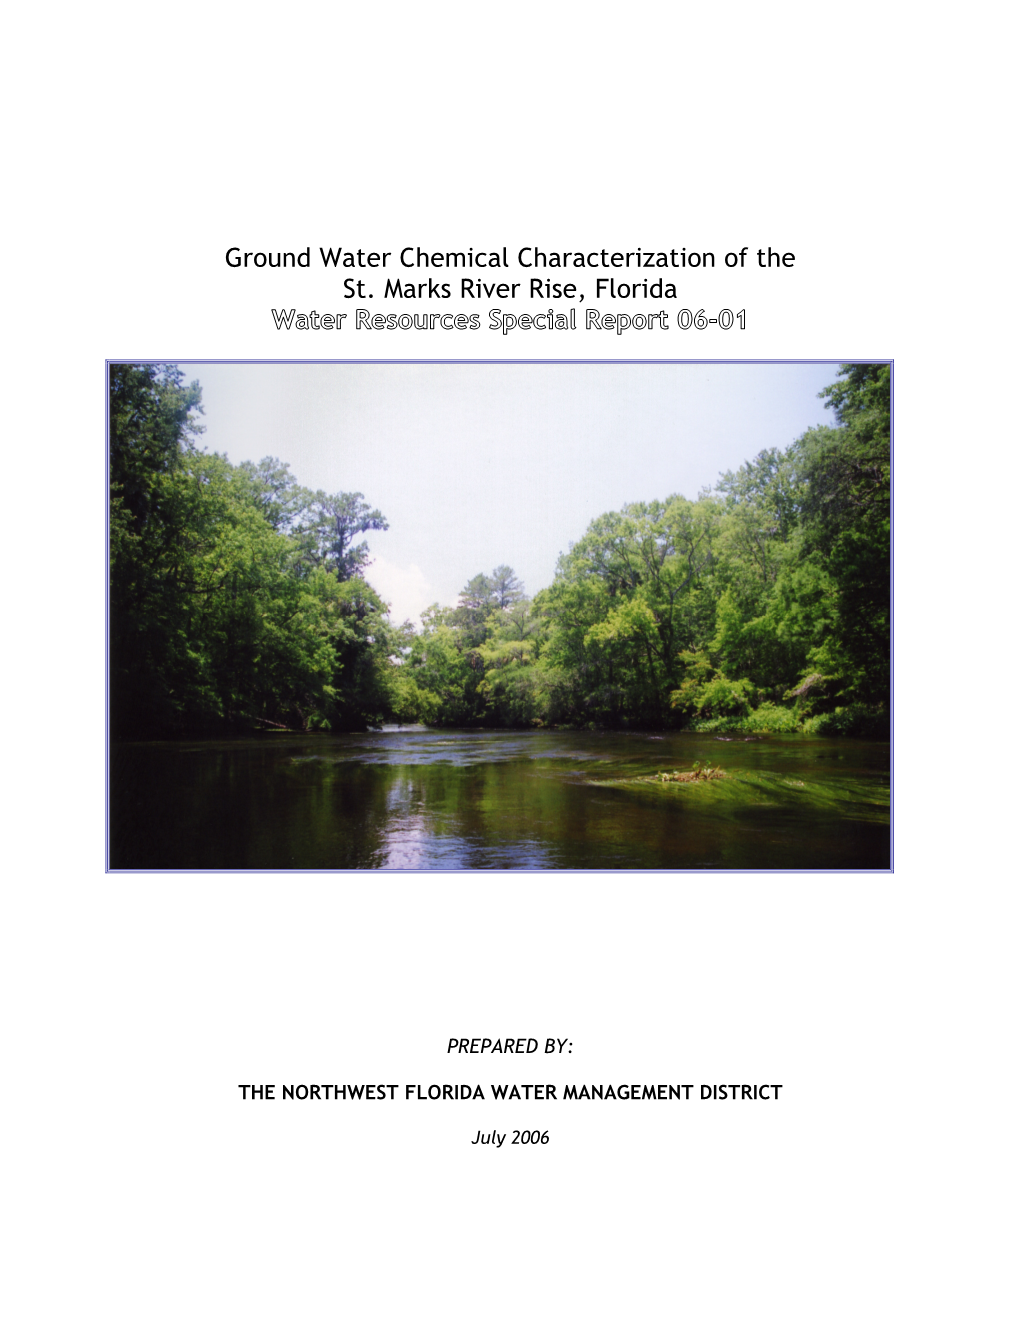 Ground Water Chemical Characterization of the St. Marks River Rise, Florida